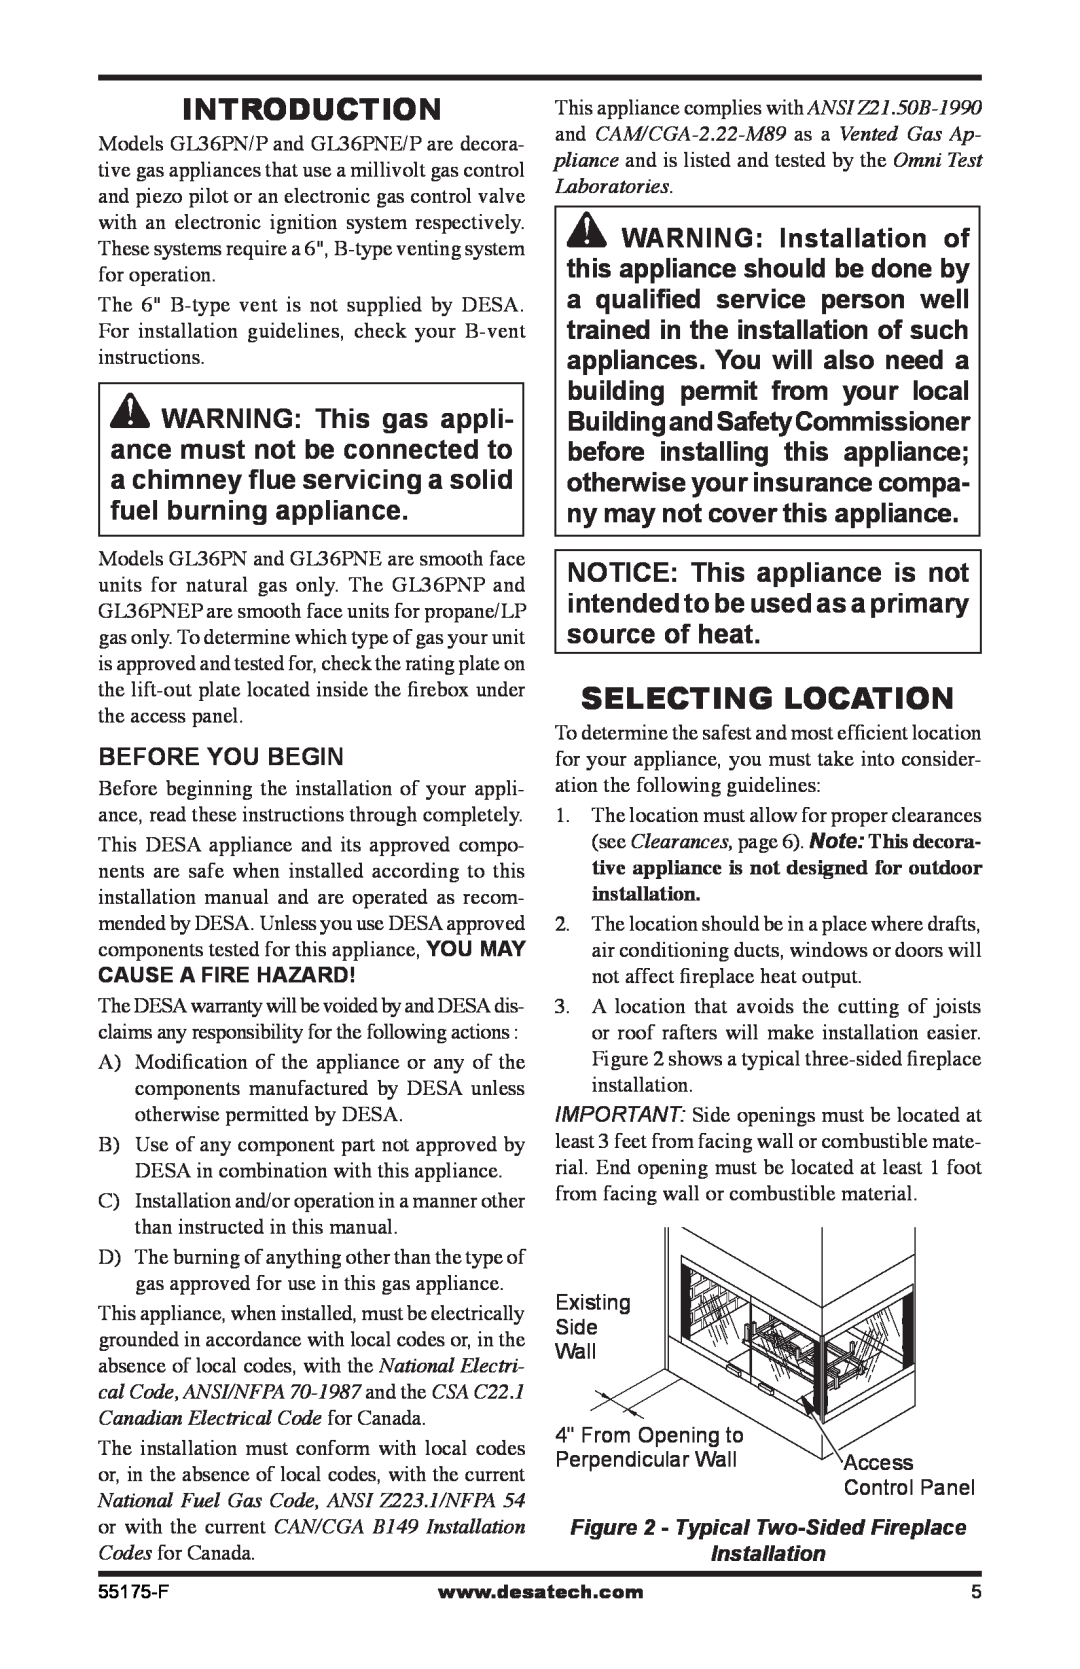 Desa GL36PNP, GL36PNEP installation manual Introduction, Selecting Location, Before You Begin 